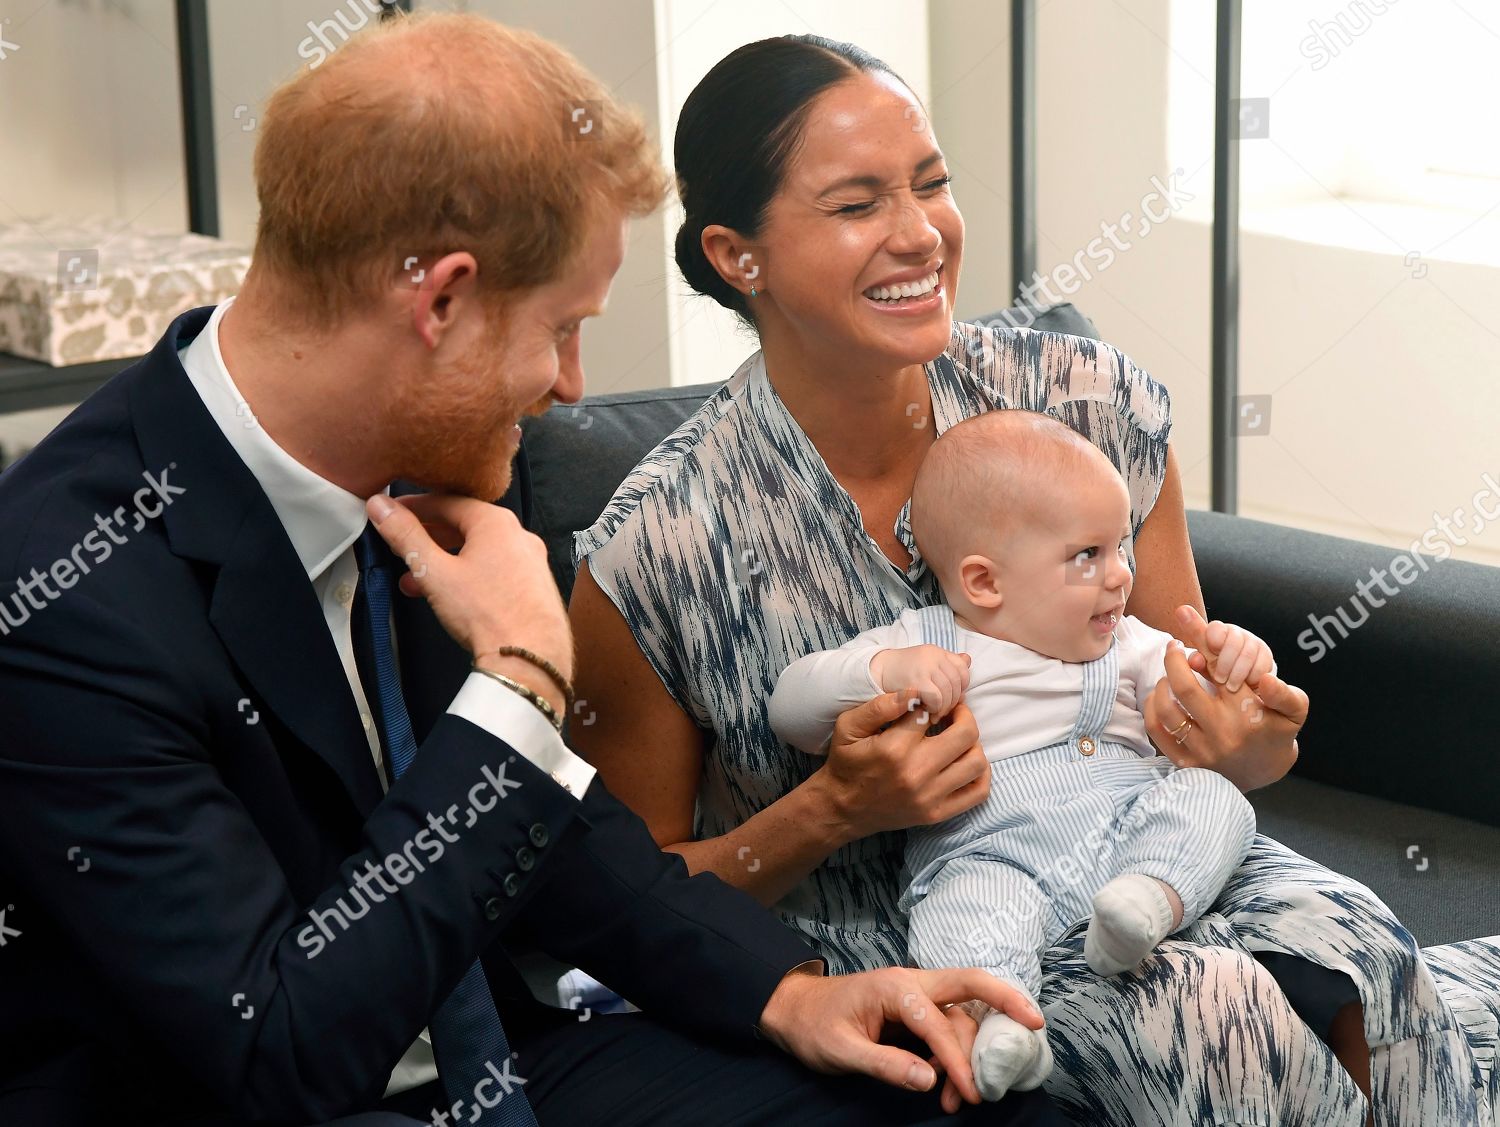 prince-harry-and-meghan-duchess-of-sussex-visit-to-africa-shutterstock-editorial-10423641z.jpg